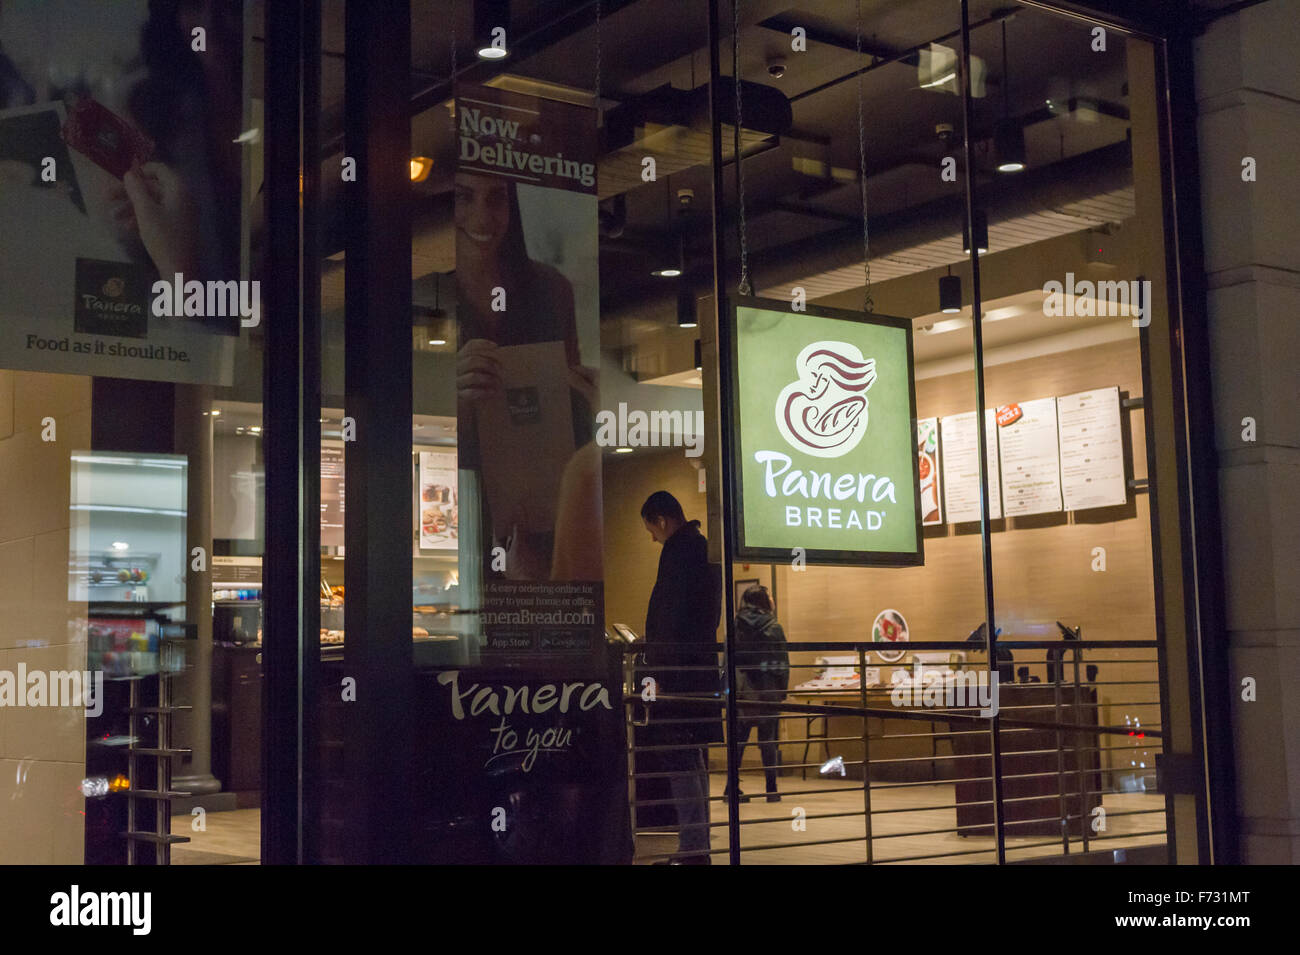 Ordering kiosks, replacing cashiers, at a Panera Bread cafe in New York, on Tuesday, November 17, 2015. Part of their 'Panera 2.0' plan, the 12 kiosks are part of a reinvention process instituted by the fast casual chain. Besides cutting customer wait times, the kiosks enable labor savings, using less workers in each cafe. All locations are expected to be equipped by the end of 2016. (© Richard B. Levine) Stock Photo